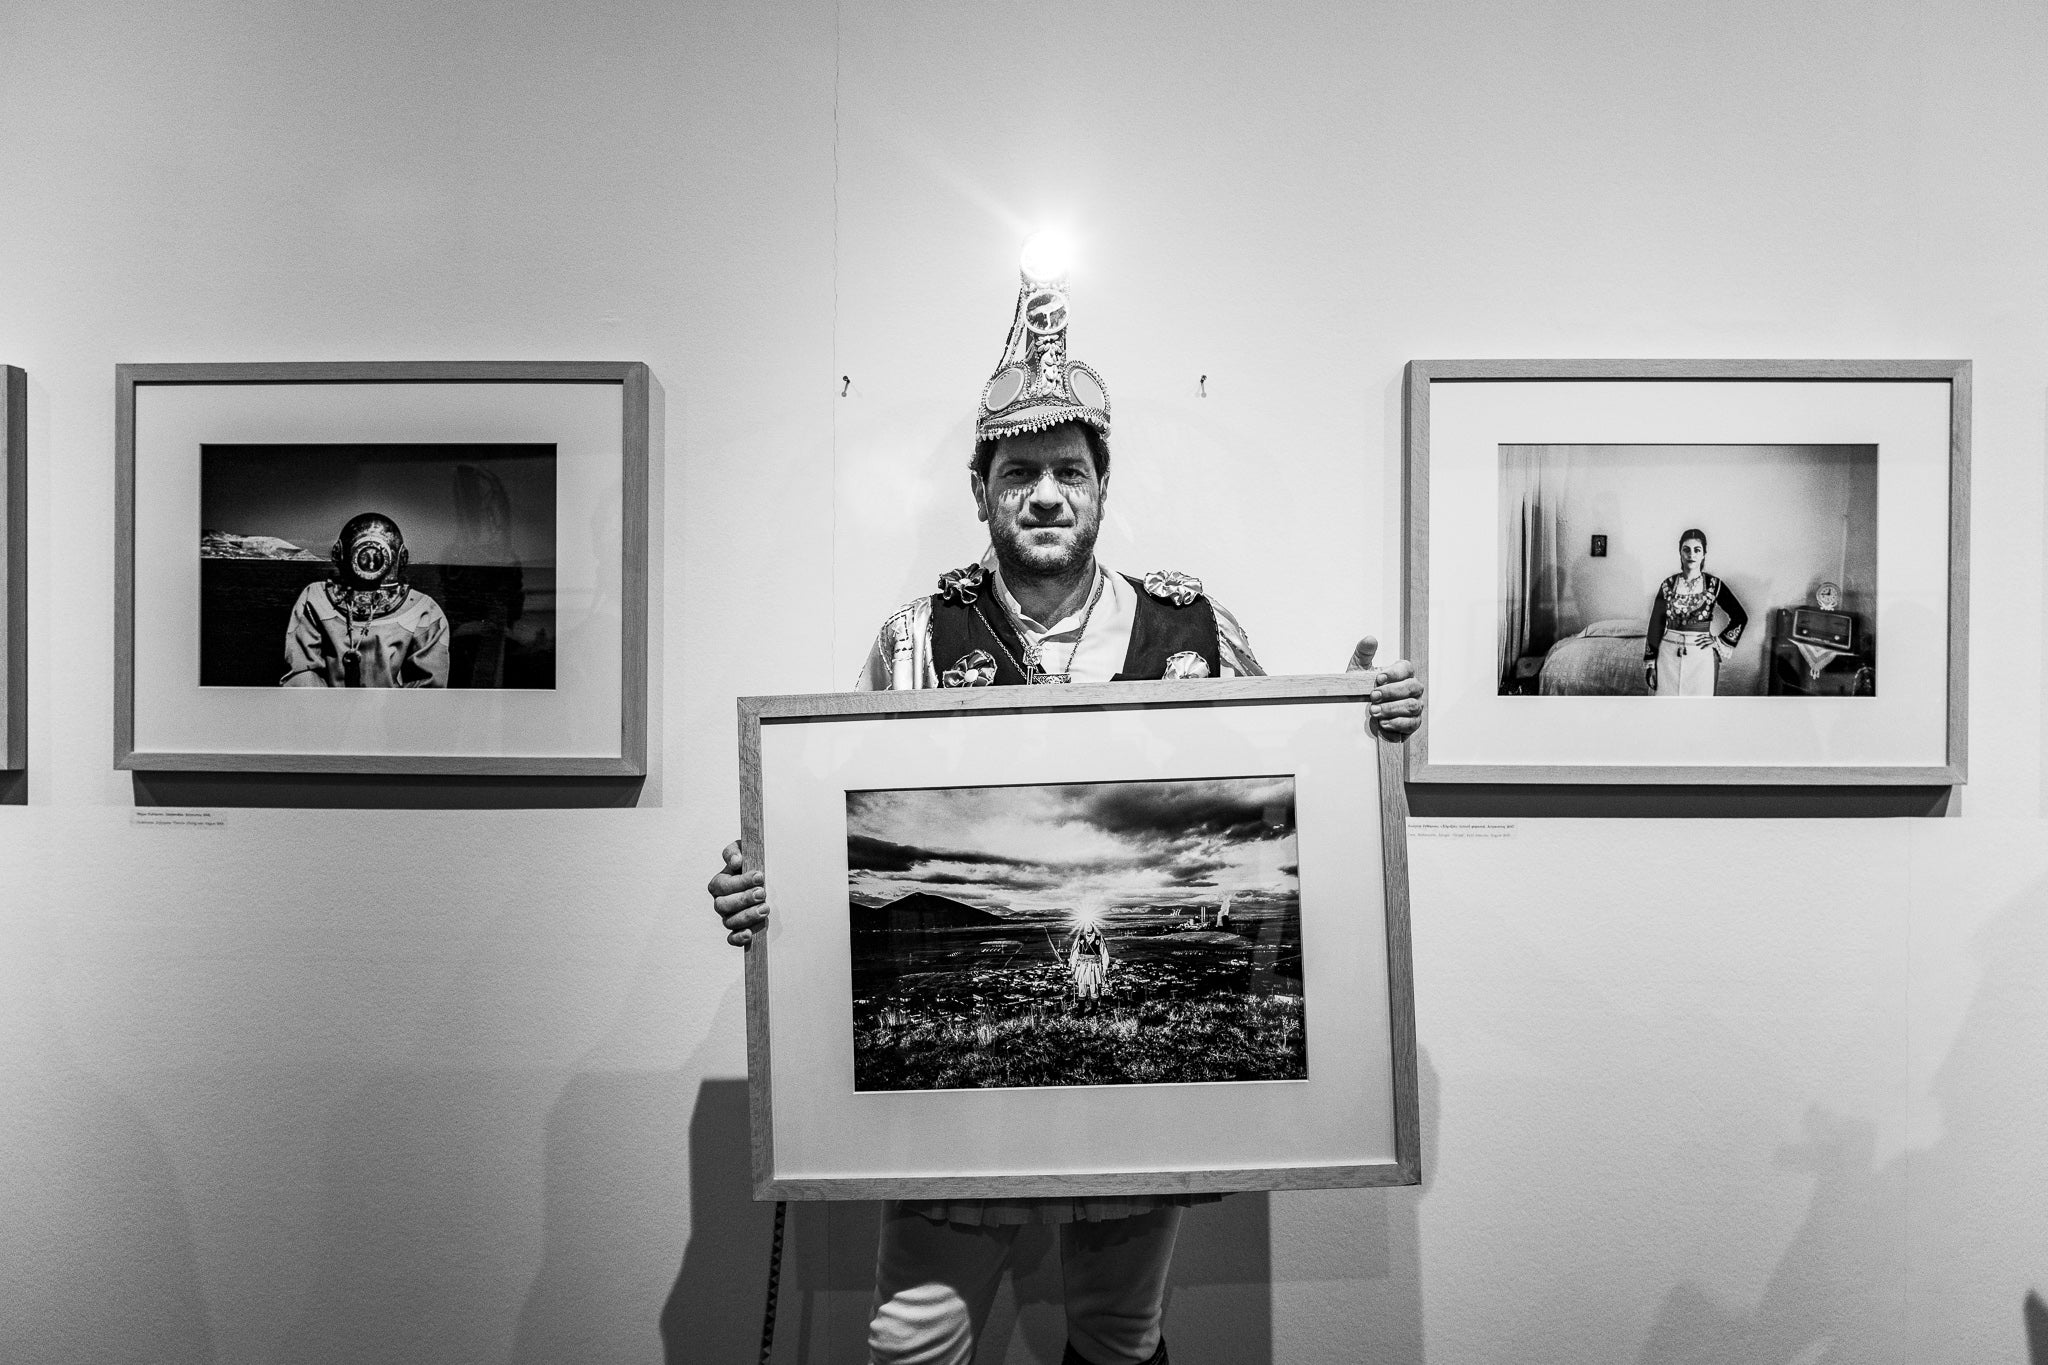 Holding a framed artwork by photographer George Tatakis, at the Benaki Museum in Athens, Greece